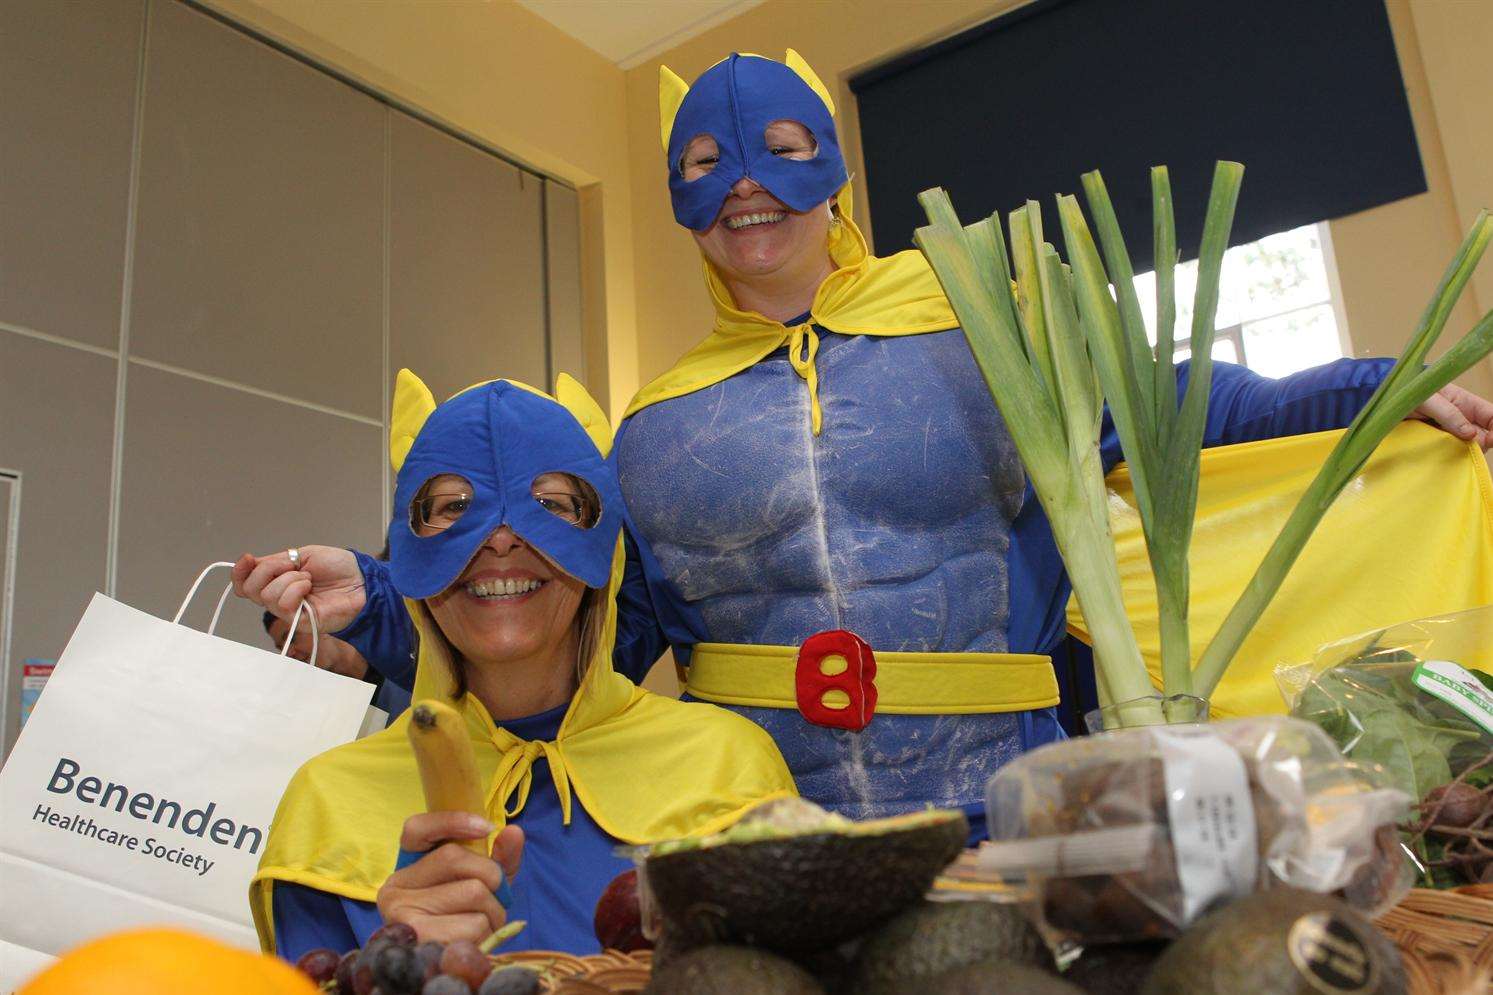 From left, Donna Avery and Emma Clements, dressed as bananaman are Support Service Coordinators at Benenden Hospital where they are promoting healthy eating